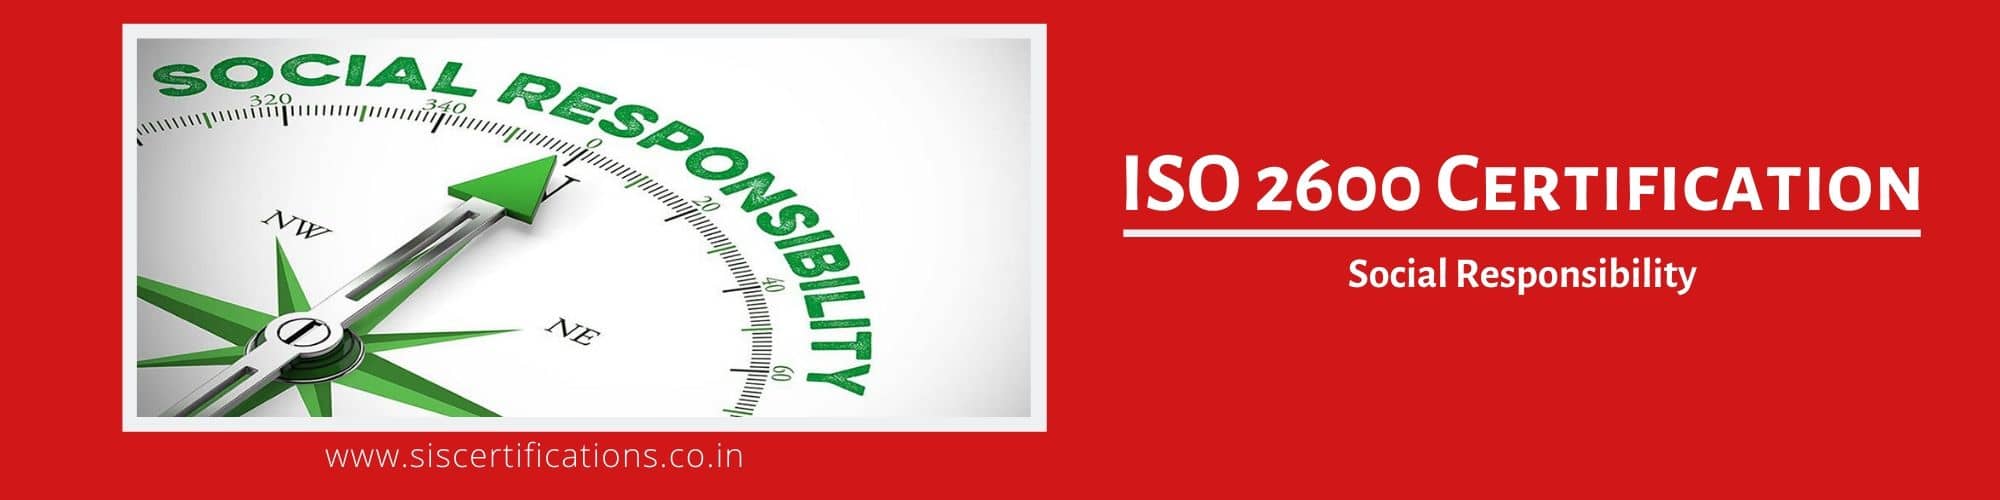 ISO 26000 Certification, ISO 26000 Certification